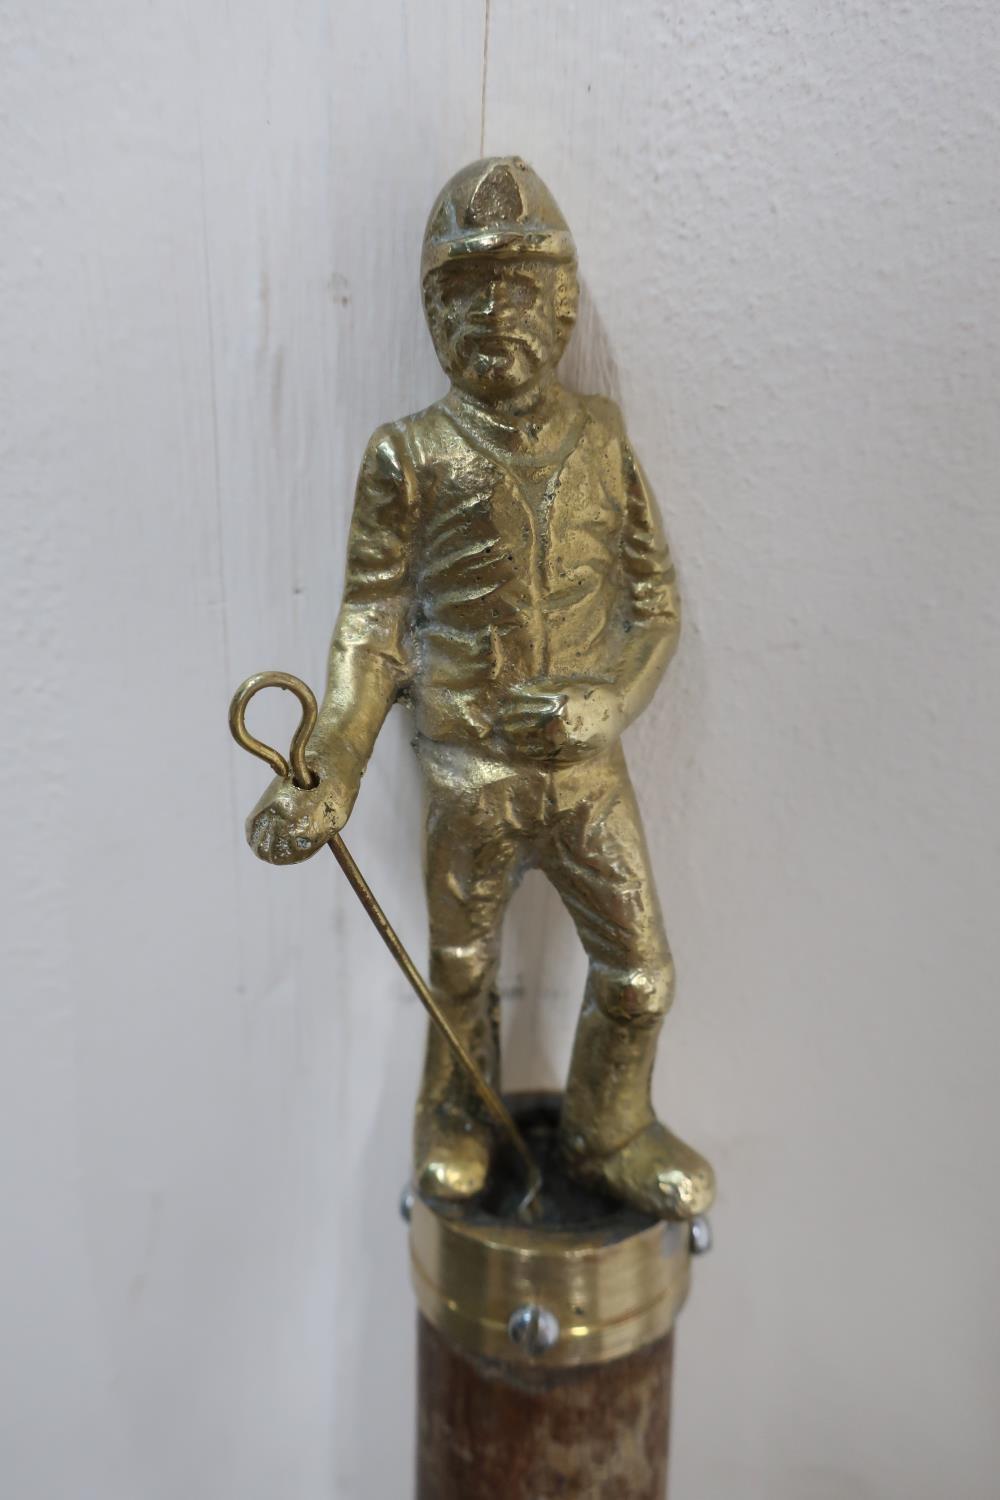 Wooden walking stick, brass handle cast as a Coal miner - Image 2 of 3